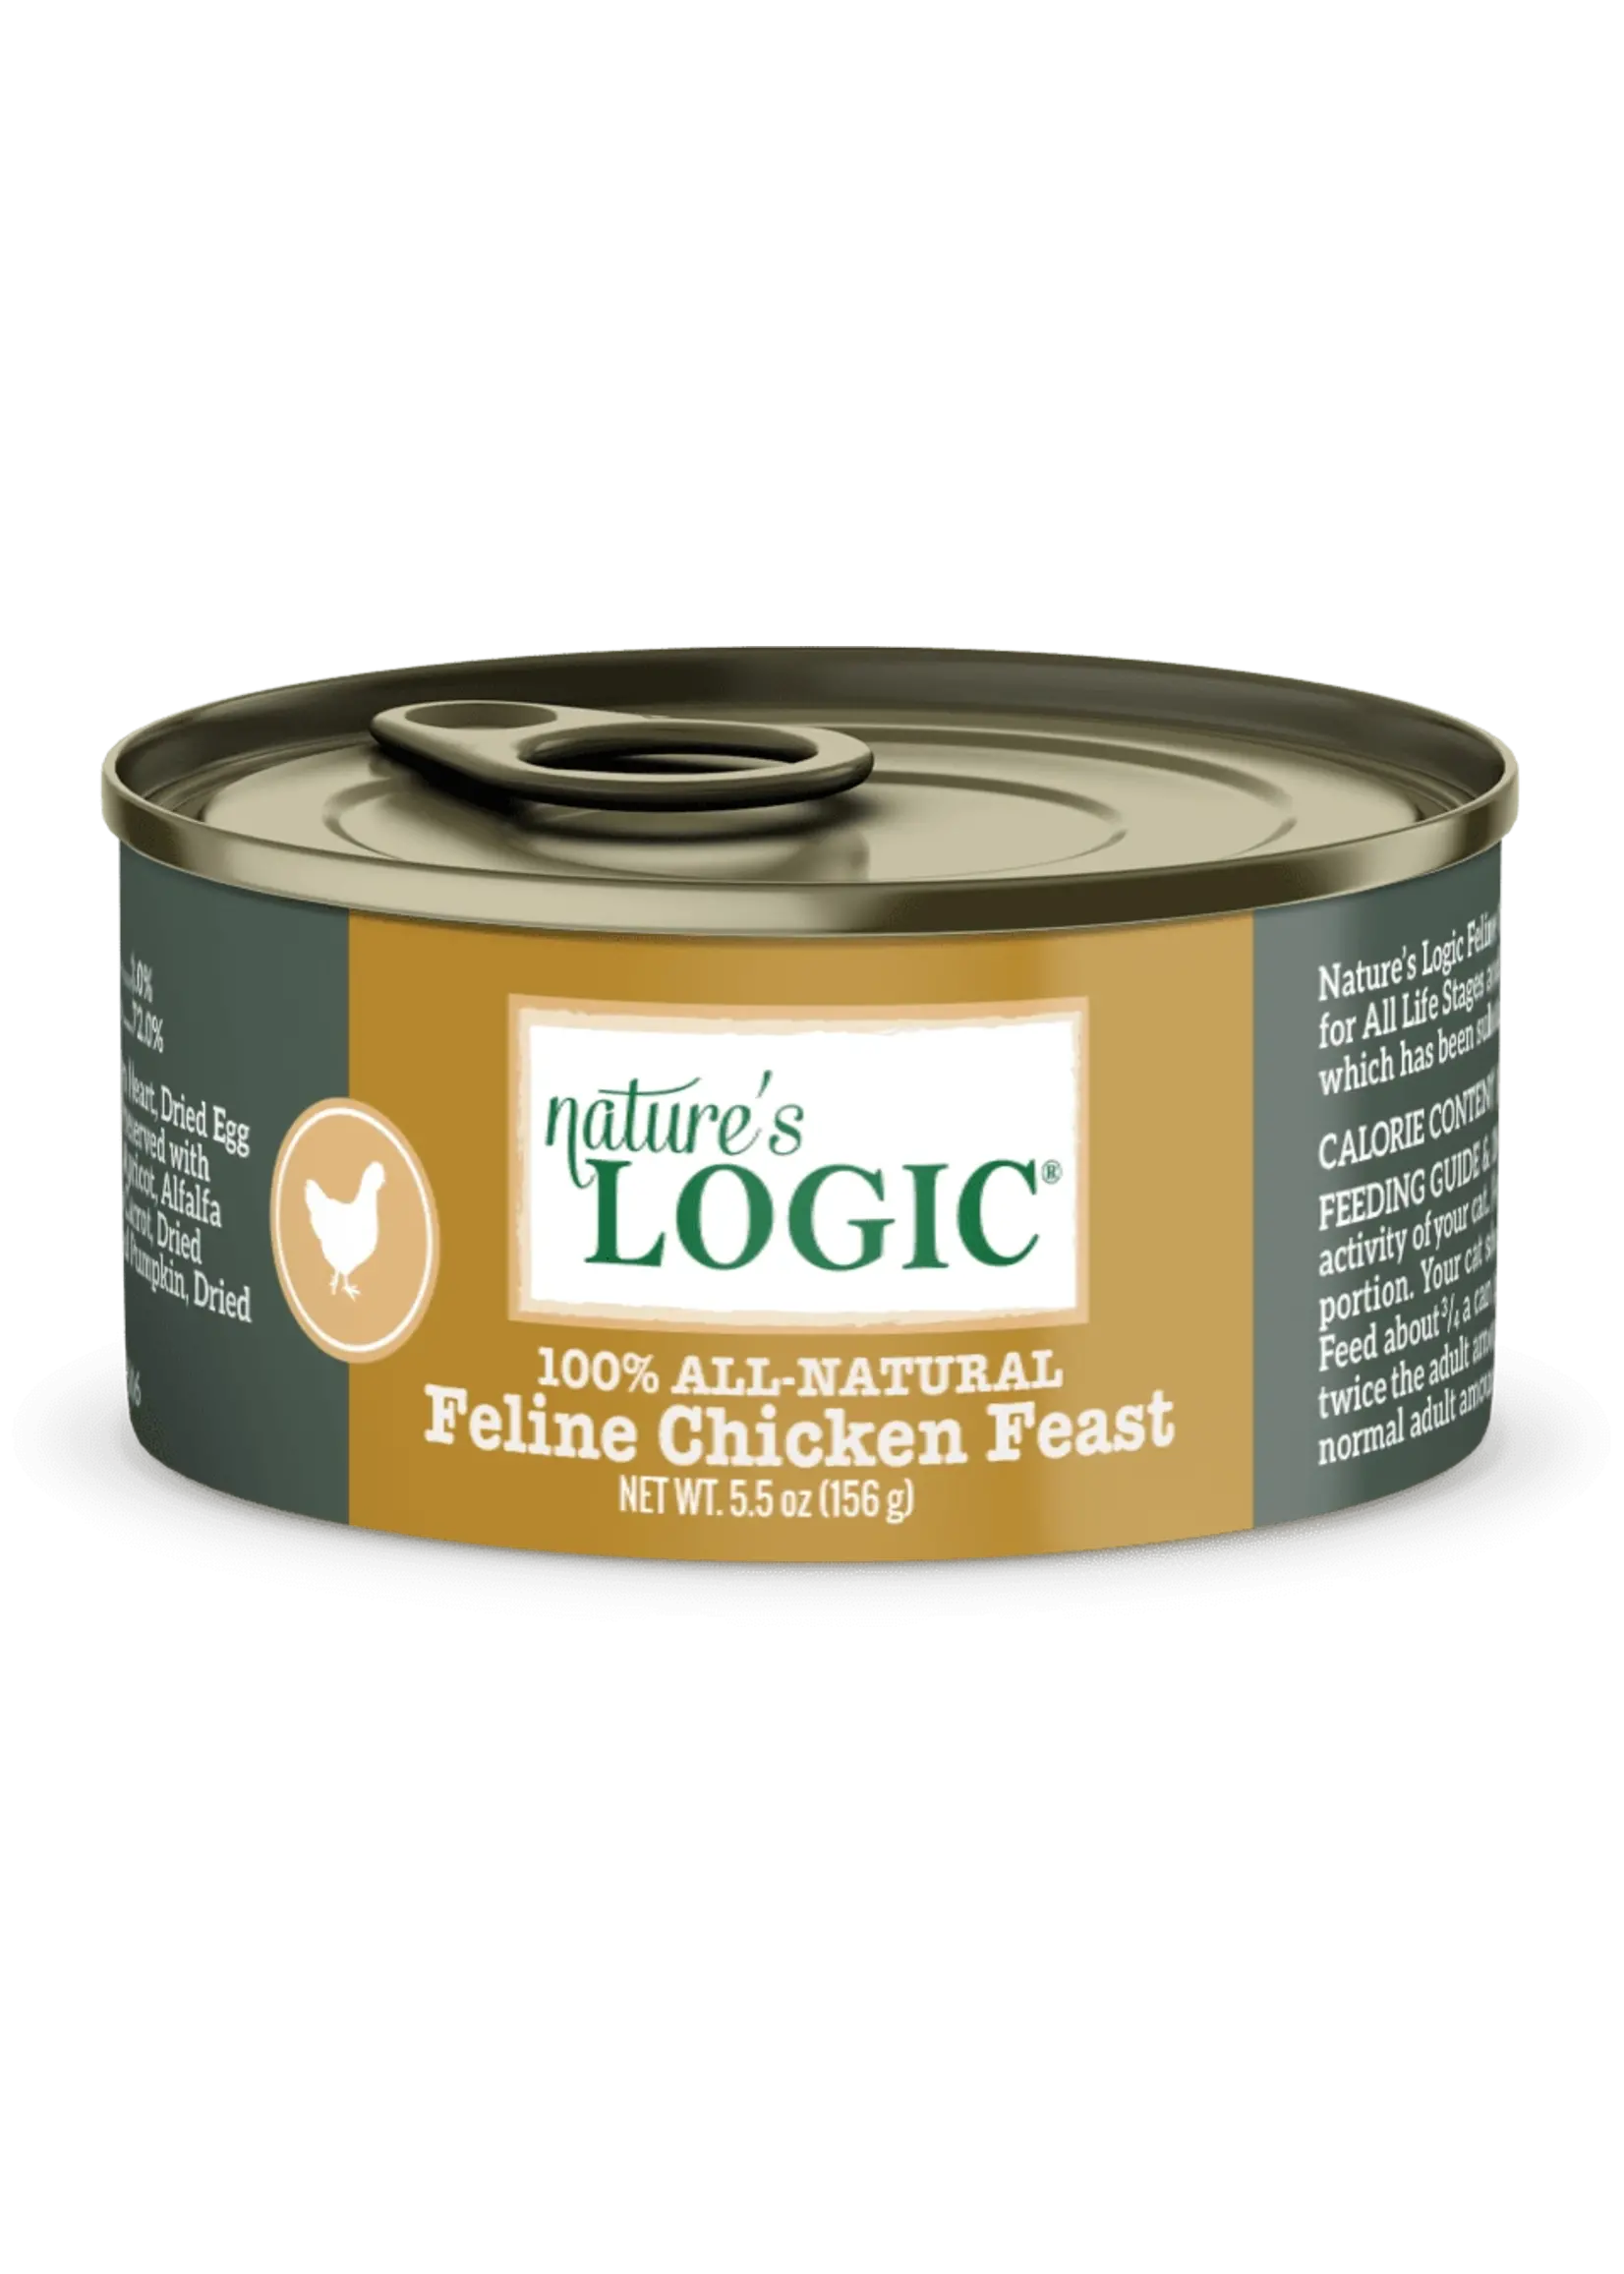 Nature's Logic Nature's Logic 5.5oz Canned Cat Food, Chicken